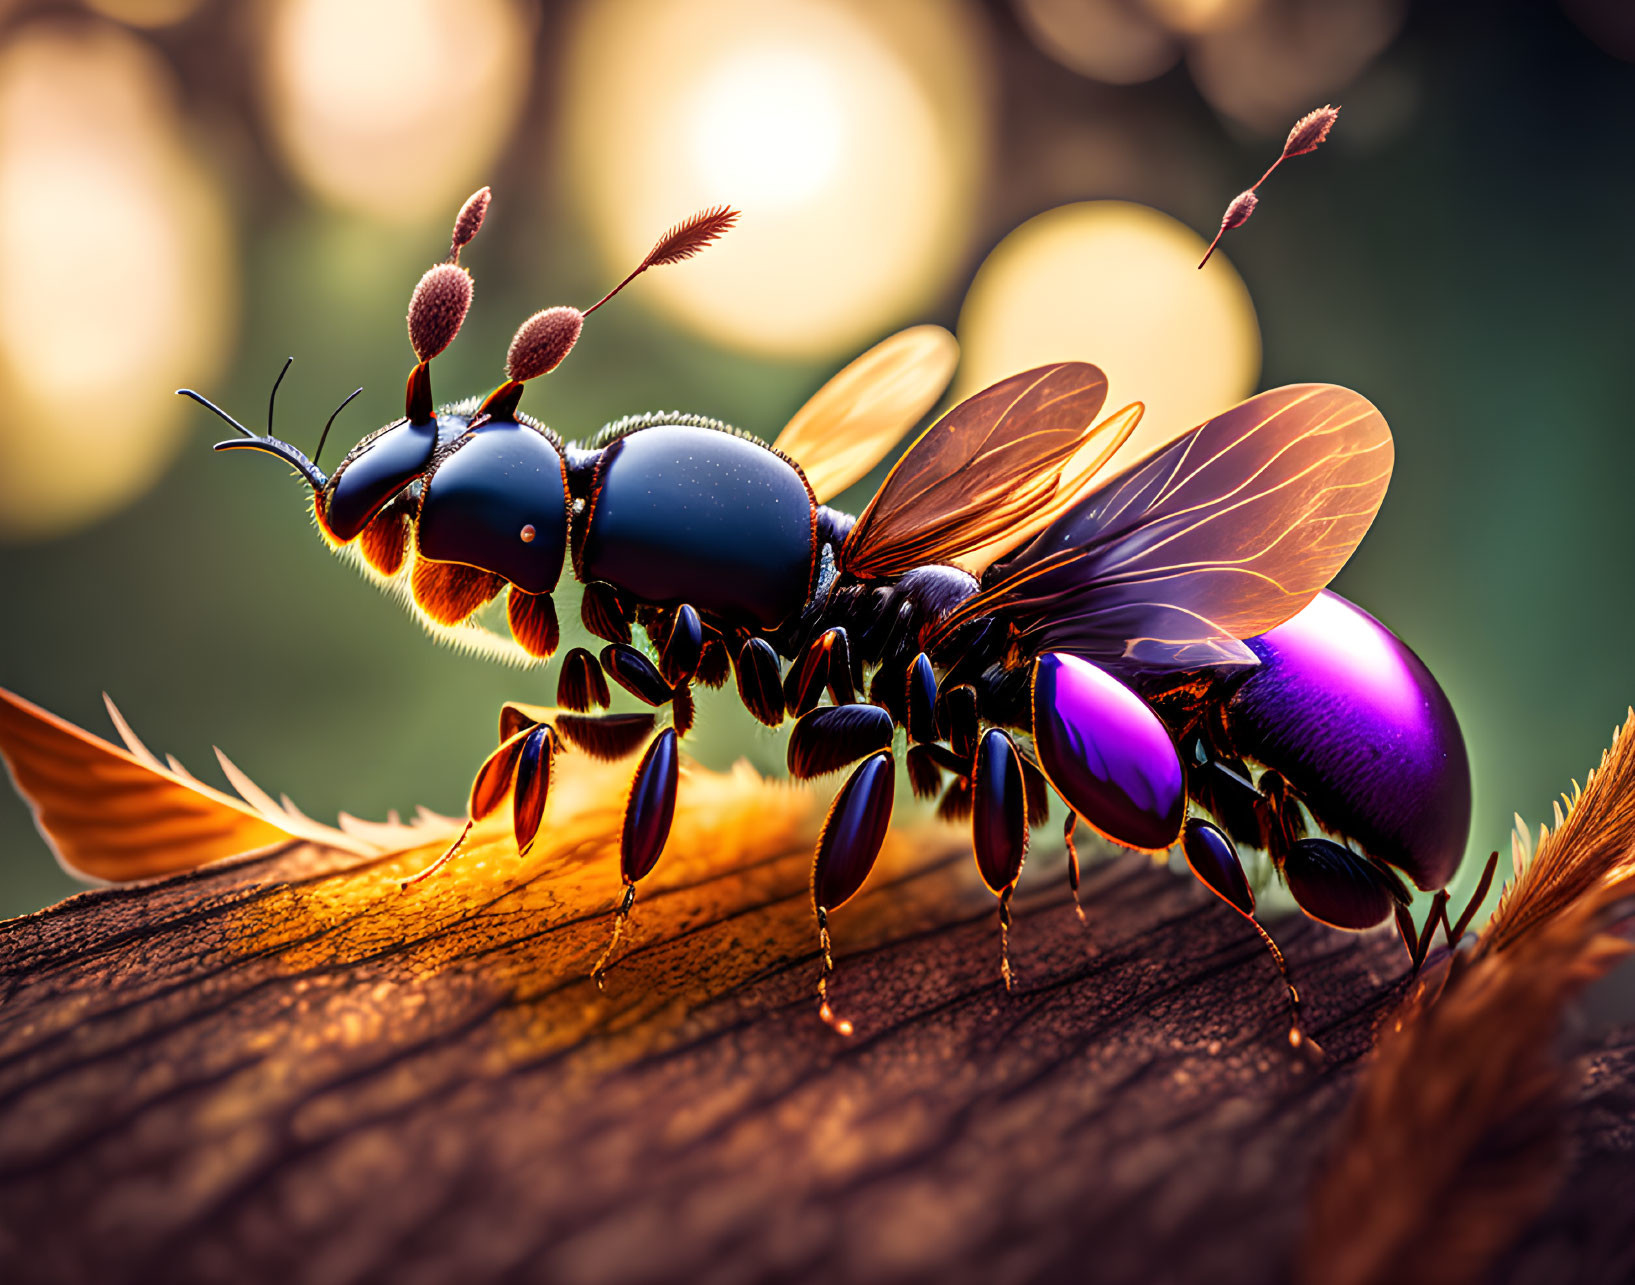 Vibrant digitally-enhanced insect with expanded wings on wooden surface